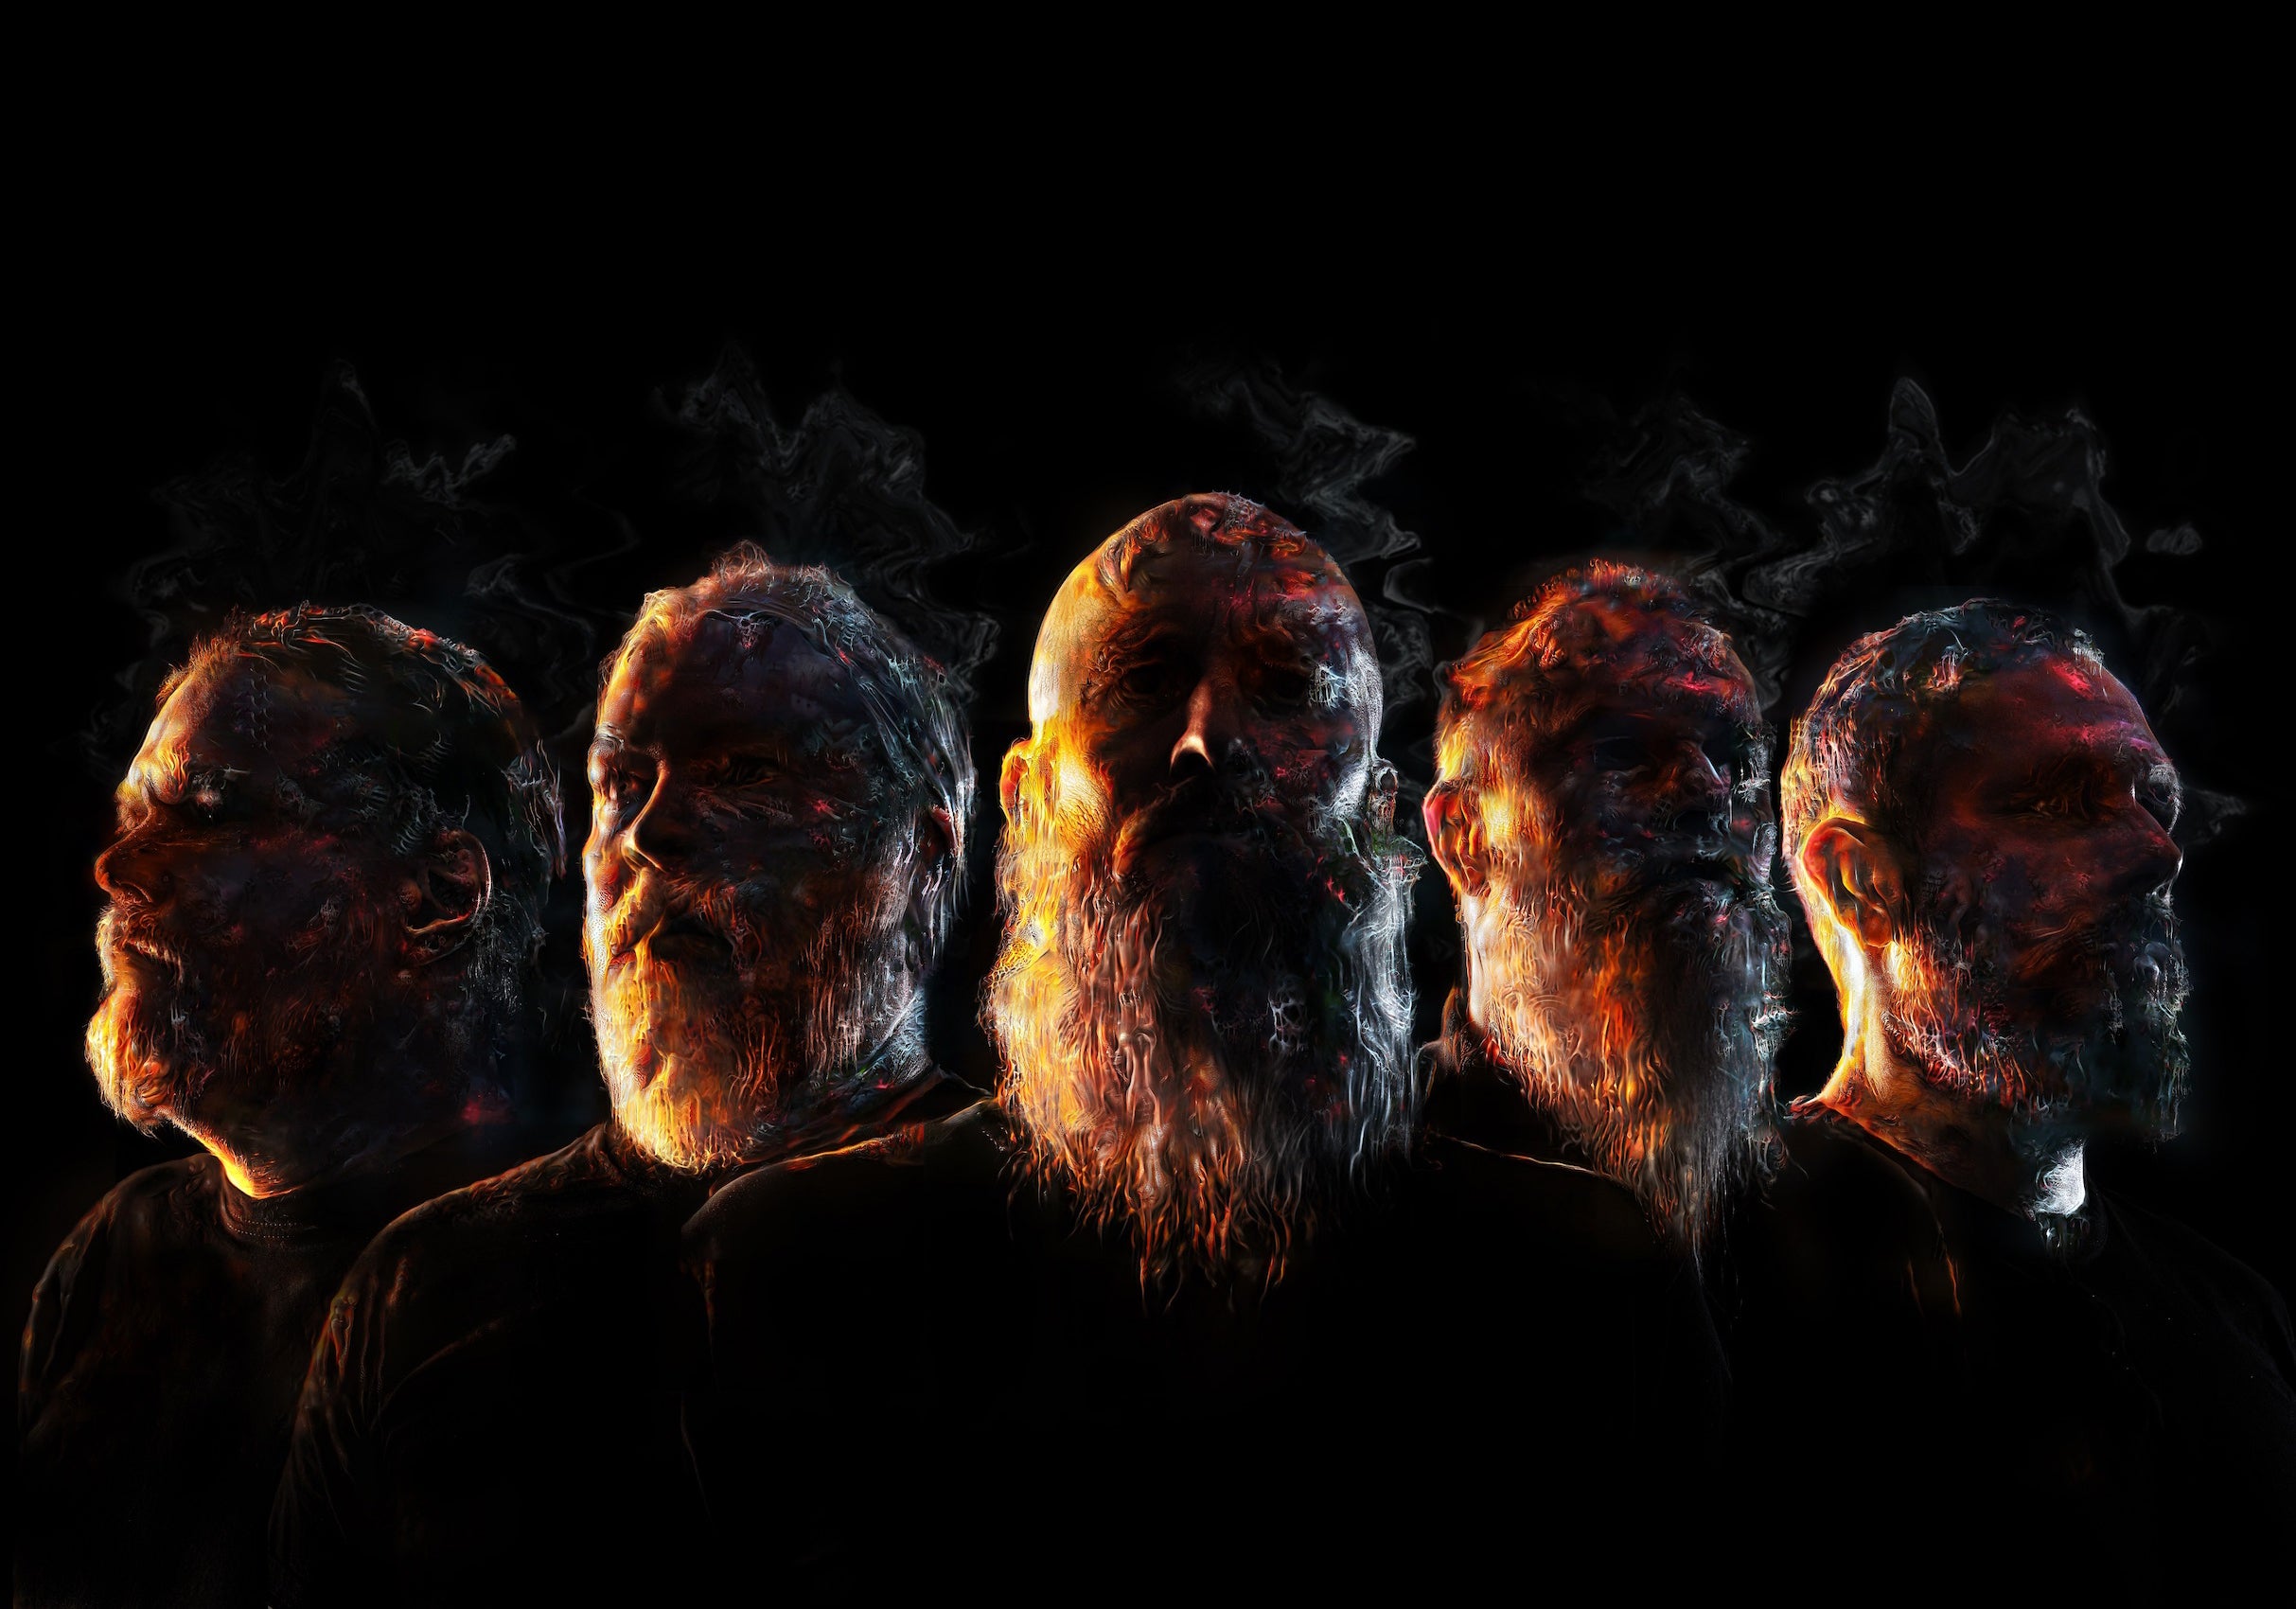 Meshuggah with Special Guests In Flames and Whitechapel